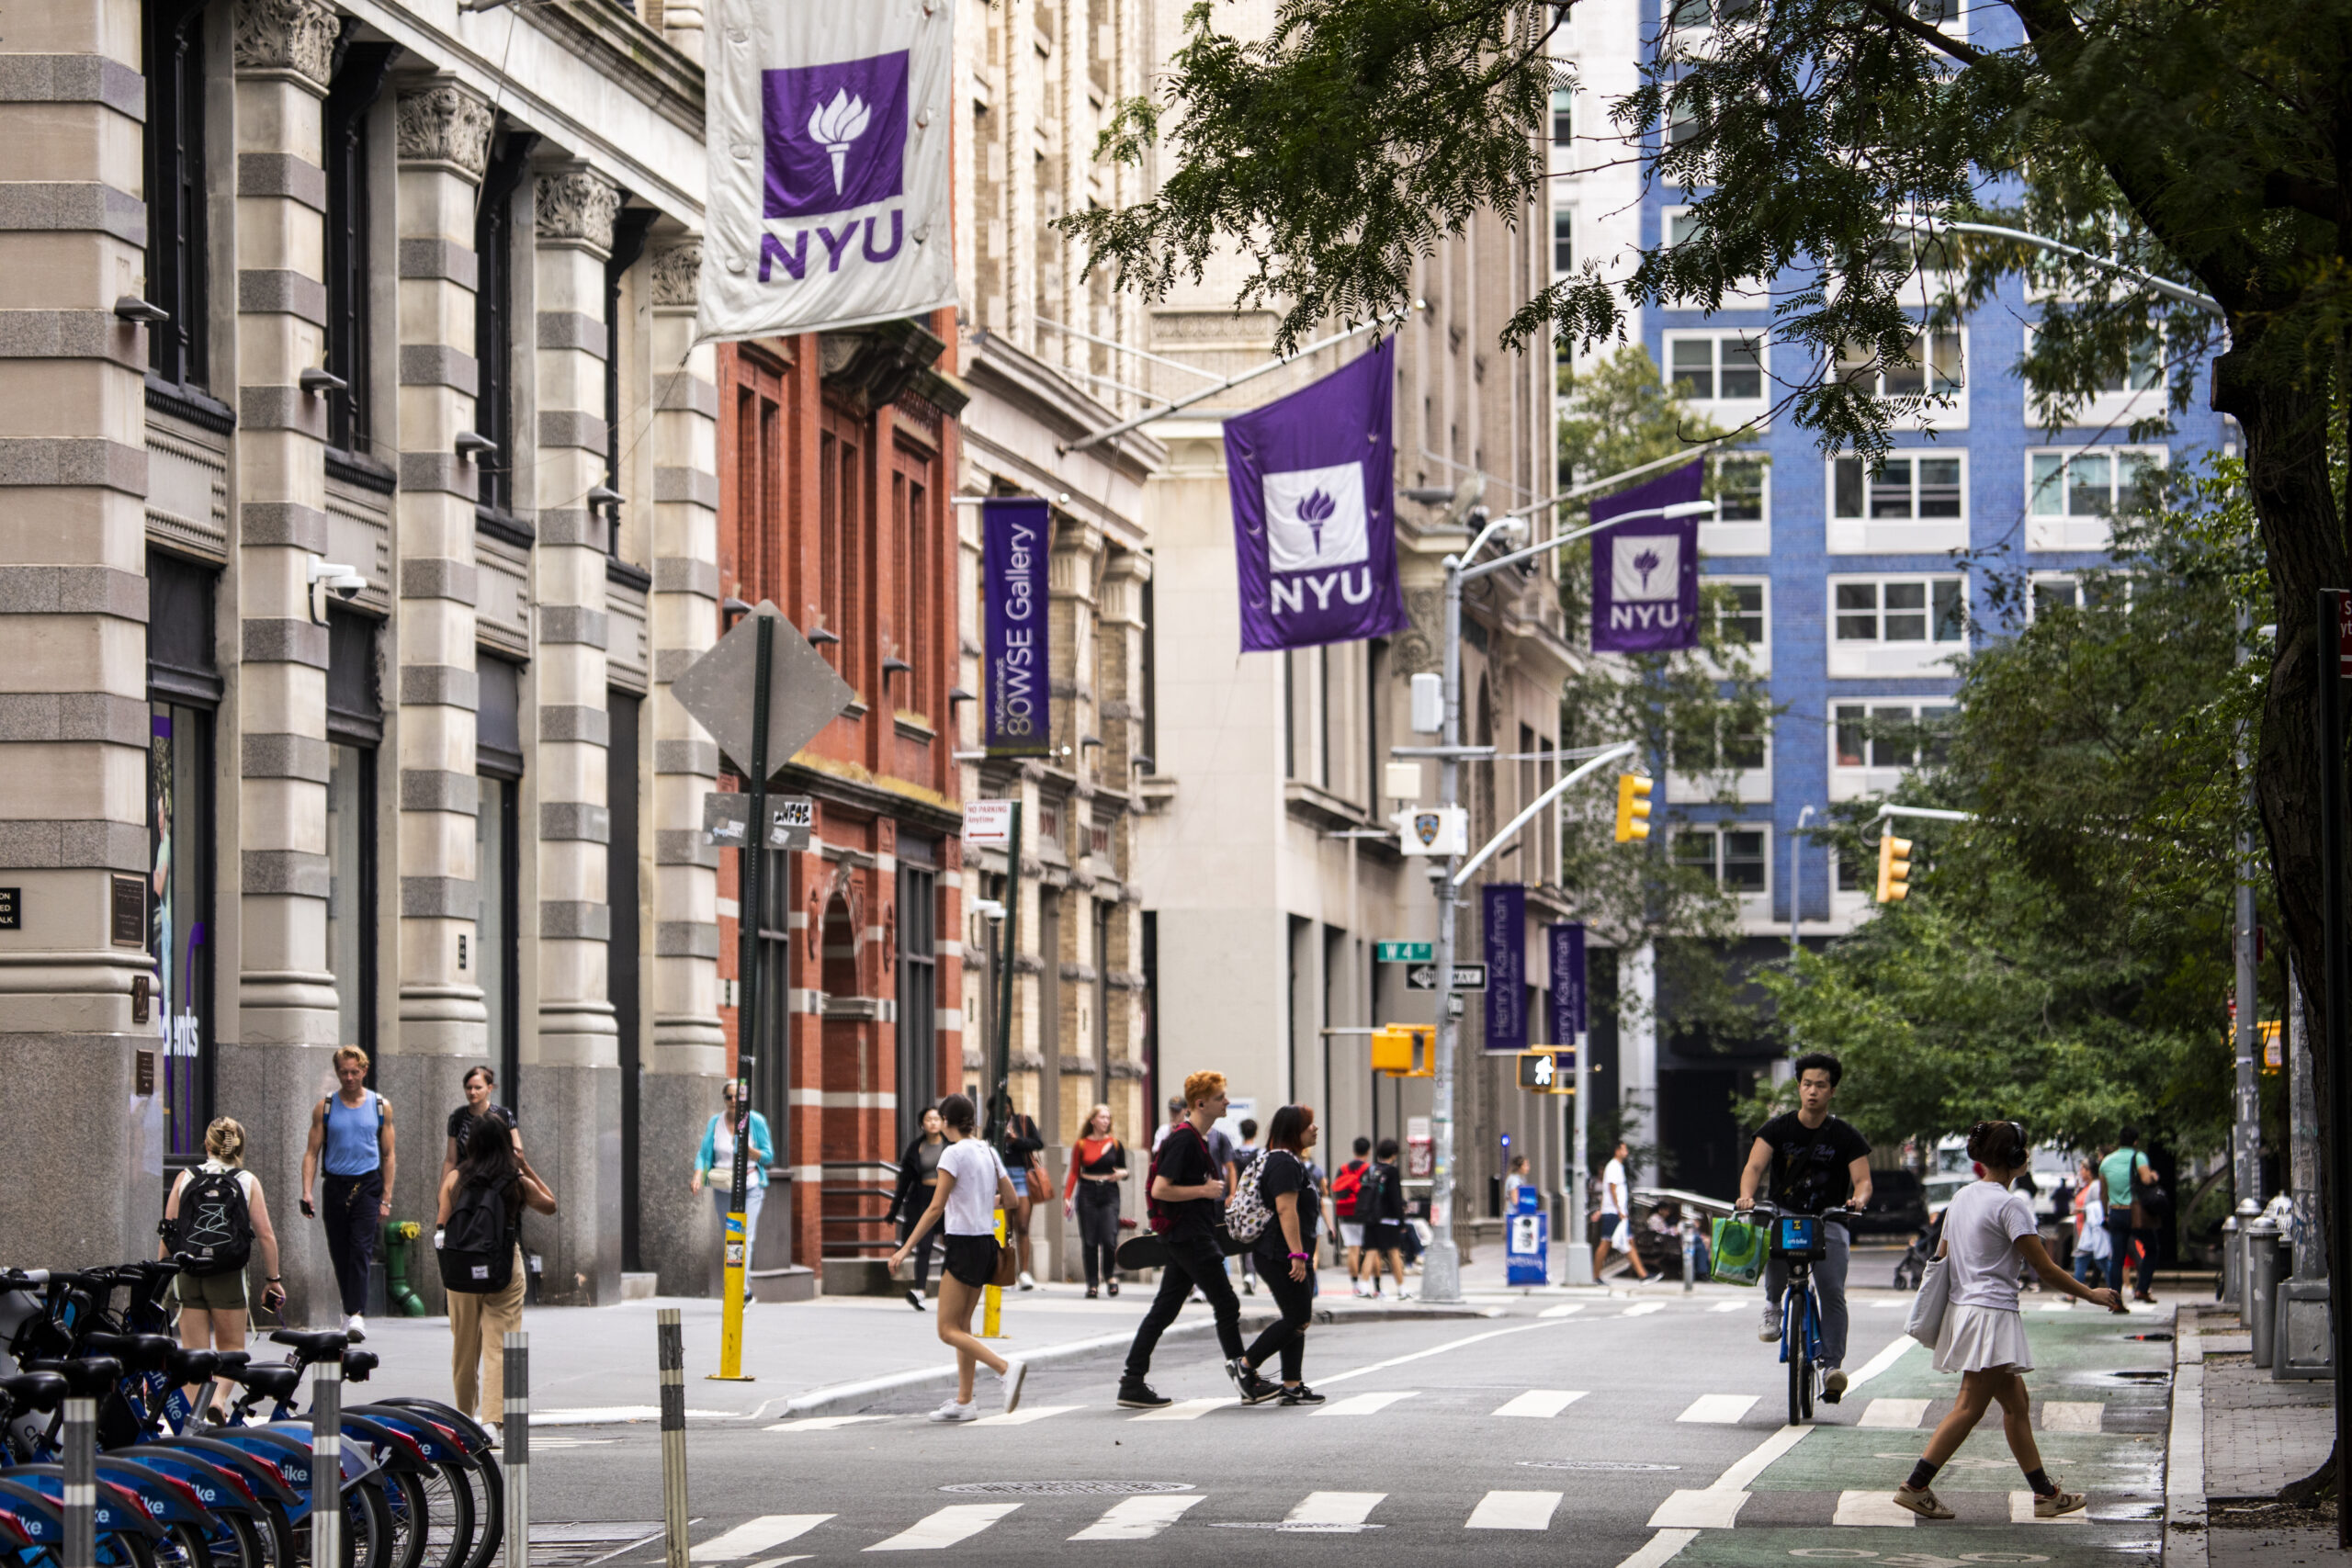 Students passing through the NYU campus in Greenwich Village.